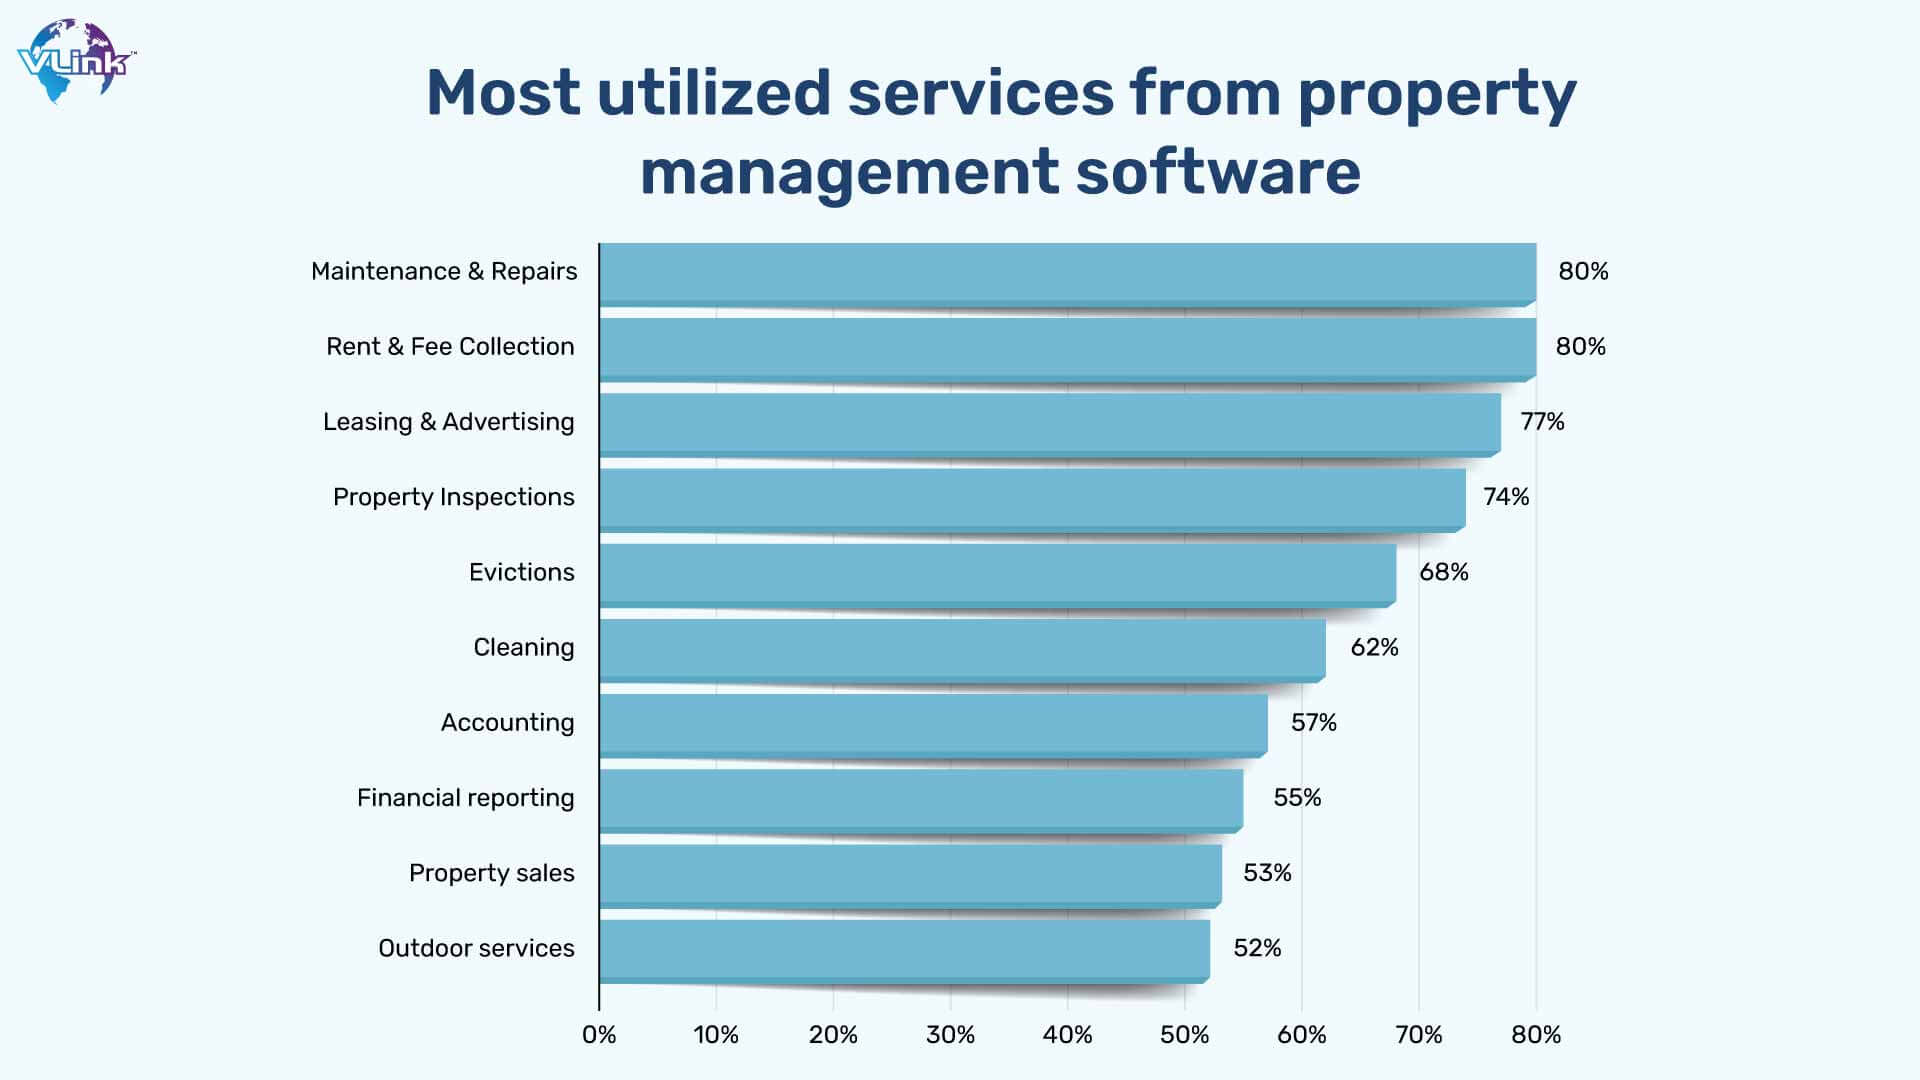 Most utilized services from property management software